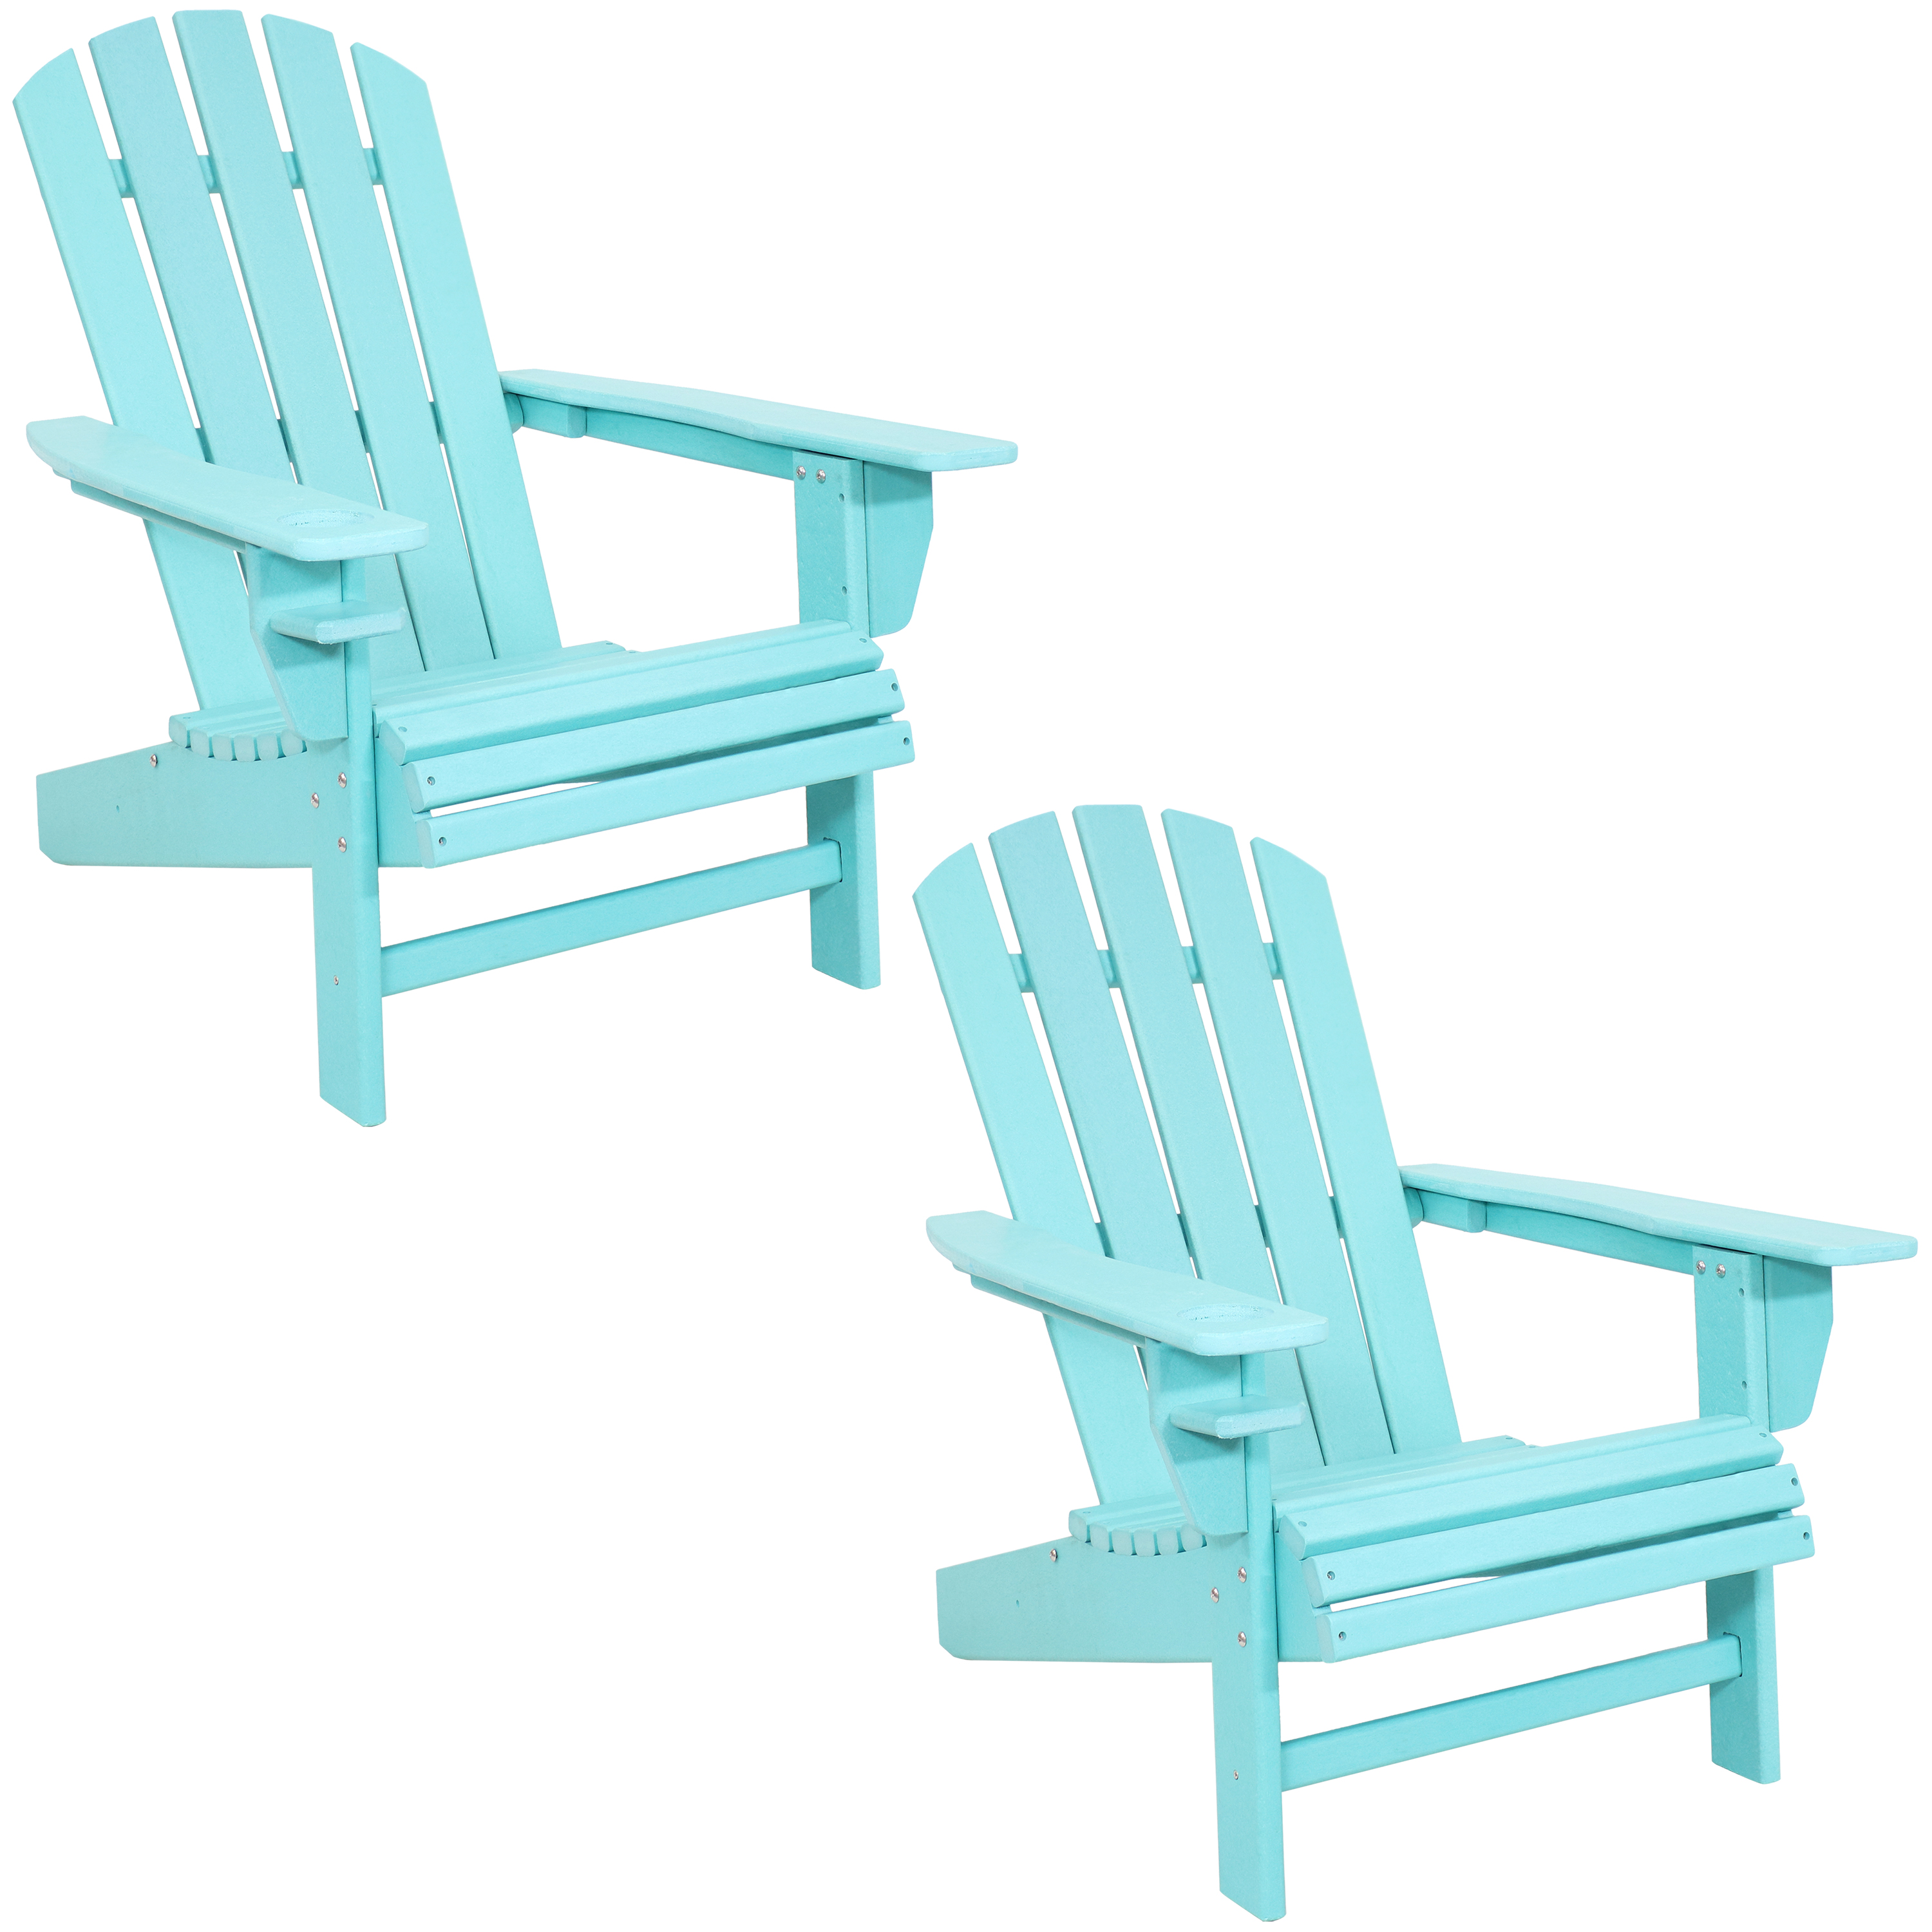 Sunnydaze Decor All-Weather Turquoise Outdoor Adirondack Chair with Drink Holder - Set of 2